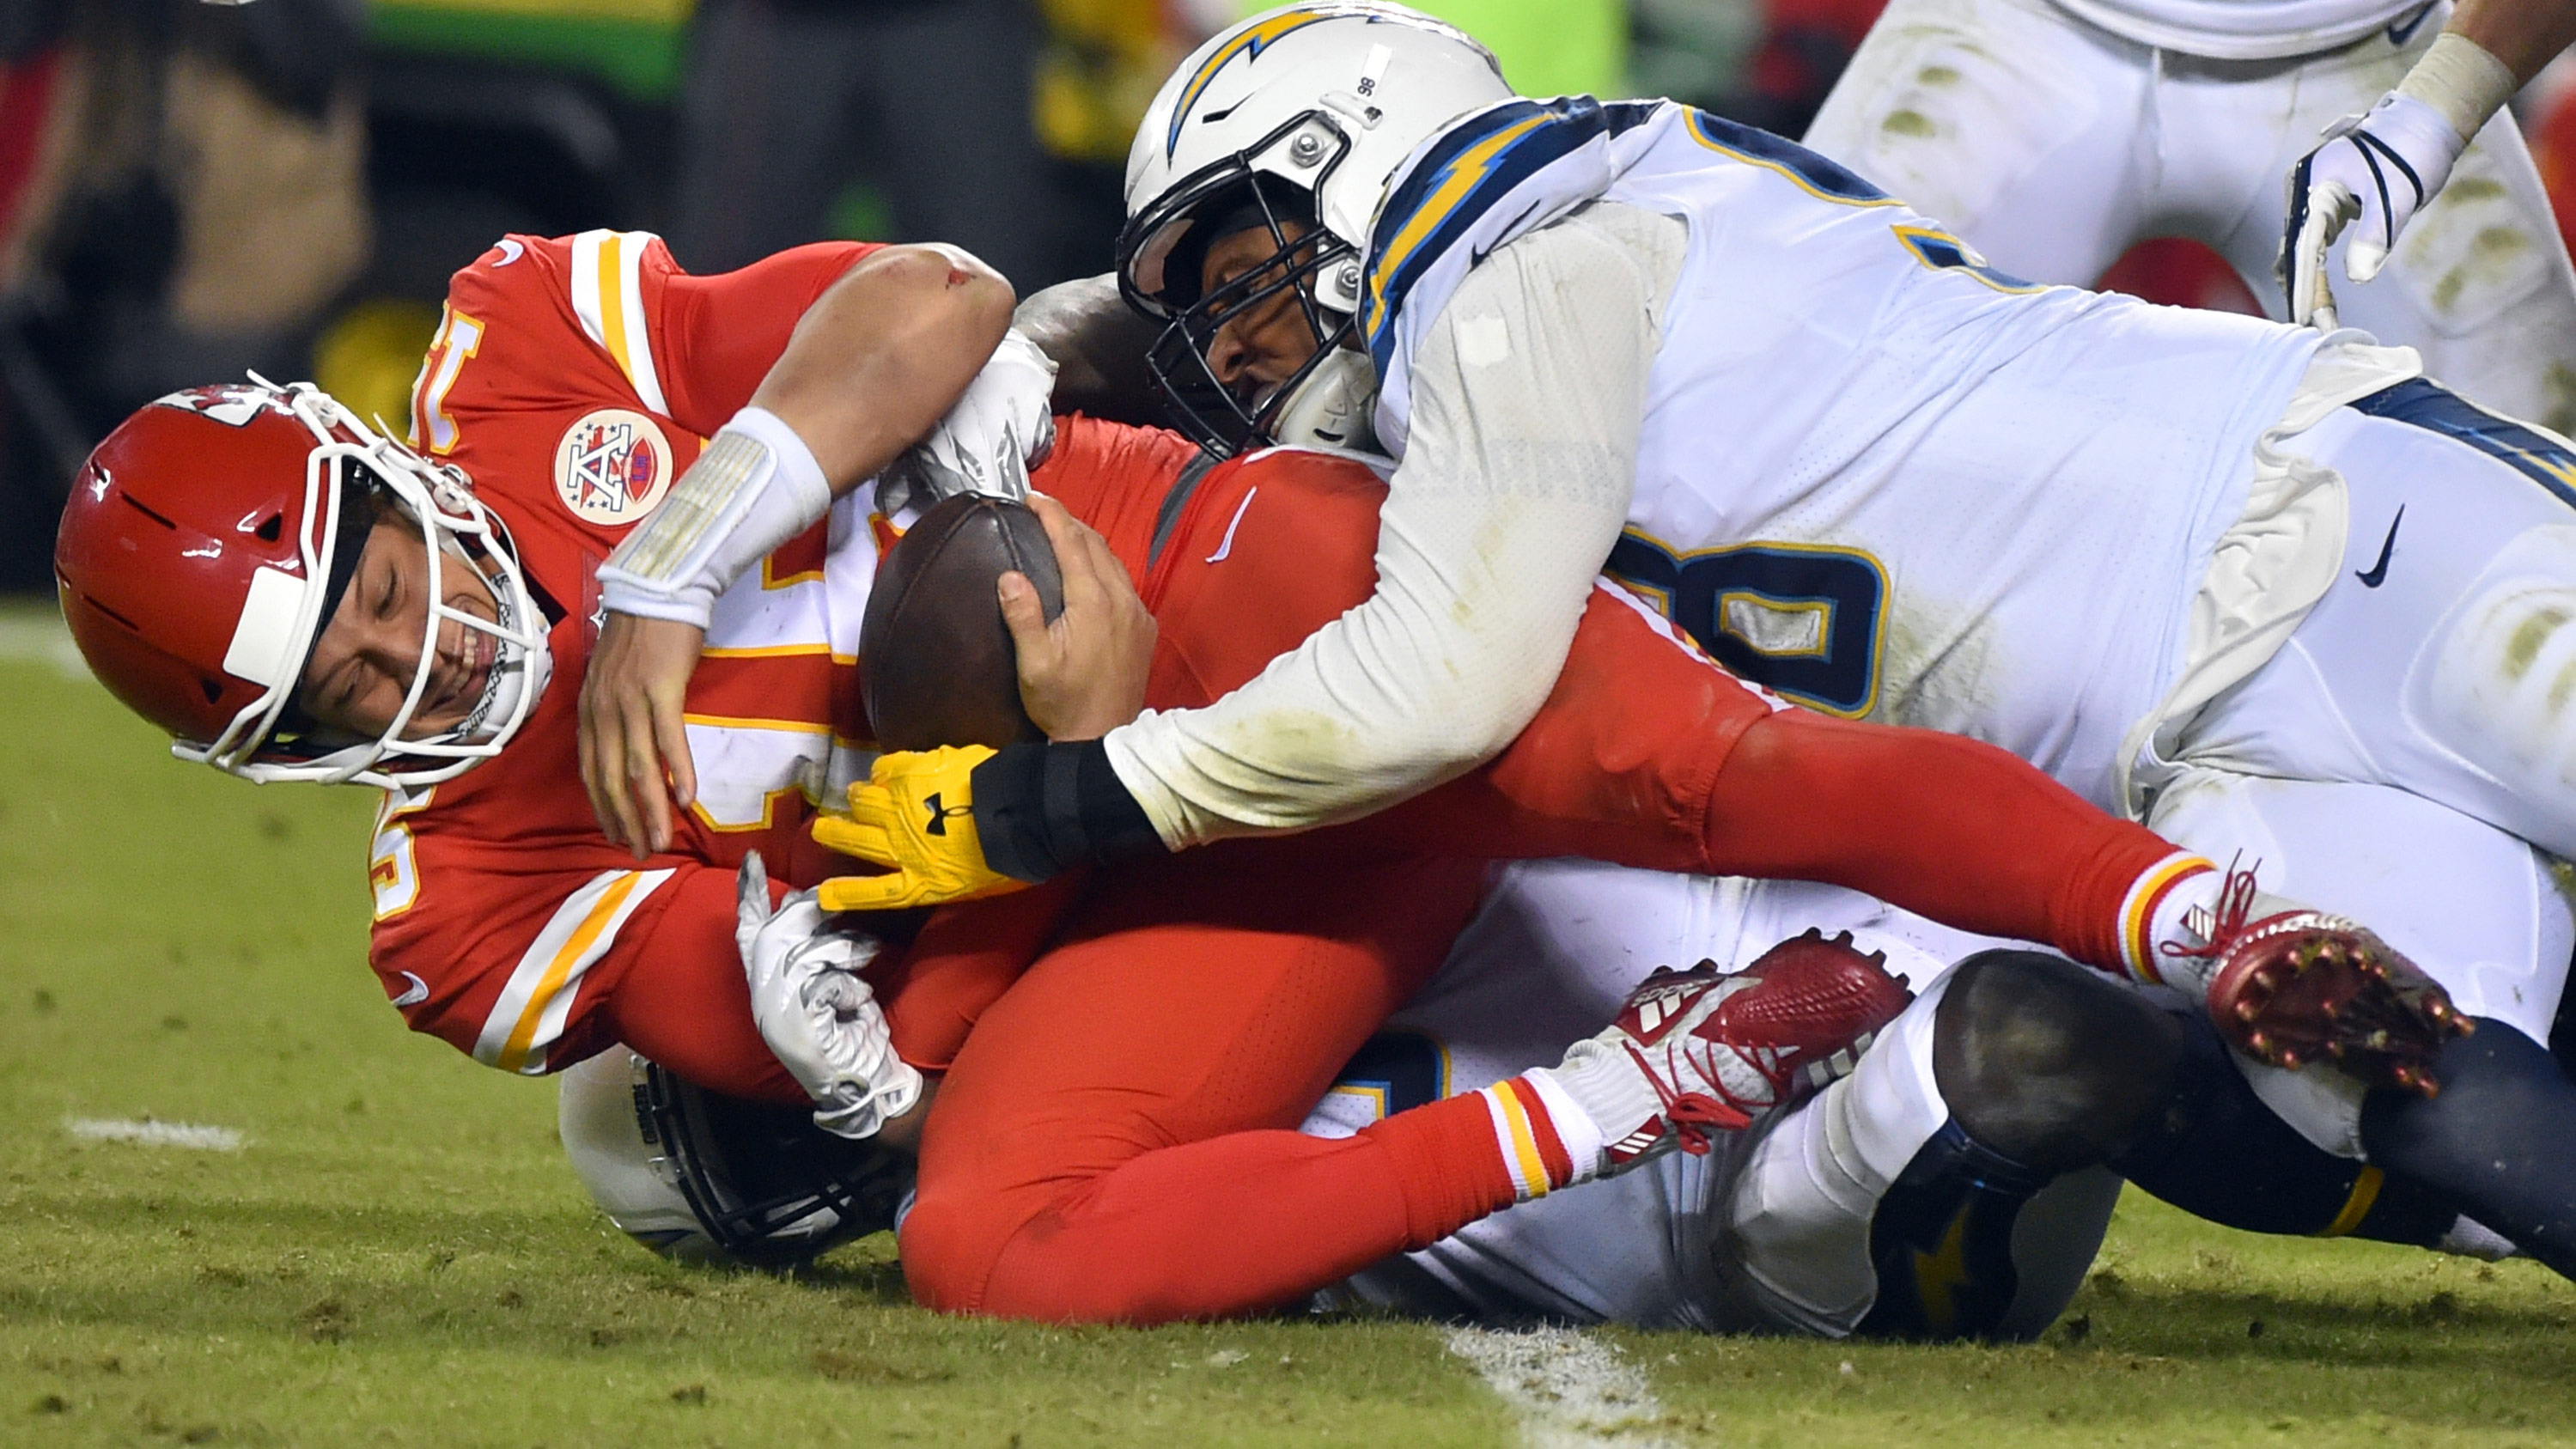 Chiefs have extra days to correct flaws in loss to Chargers